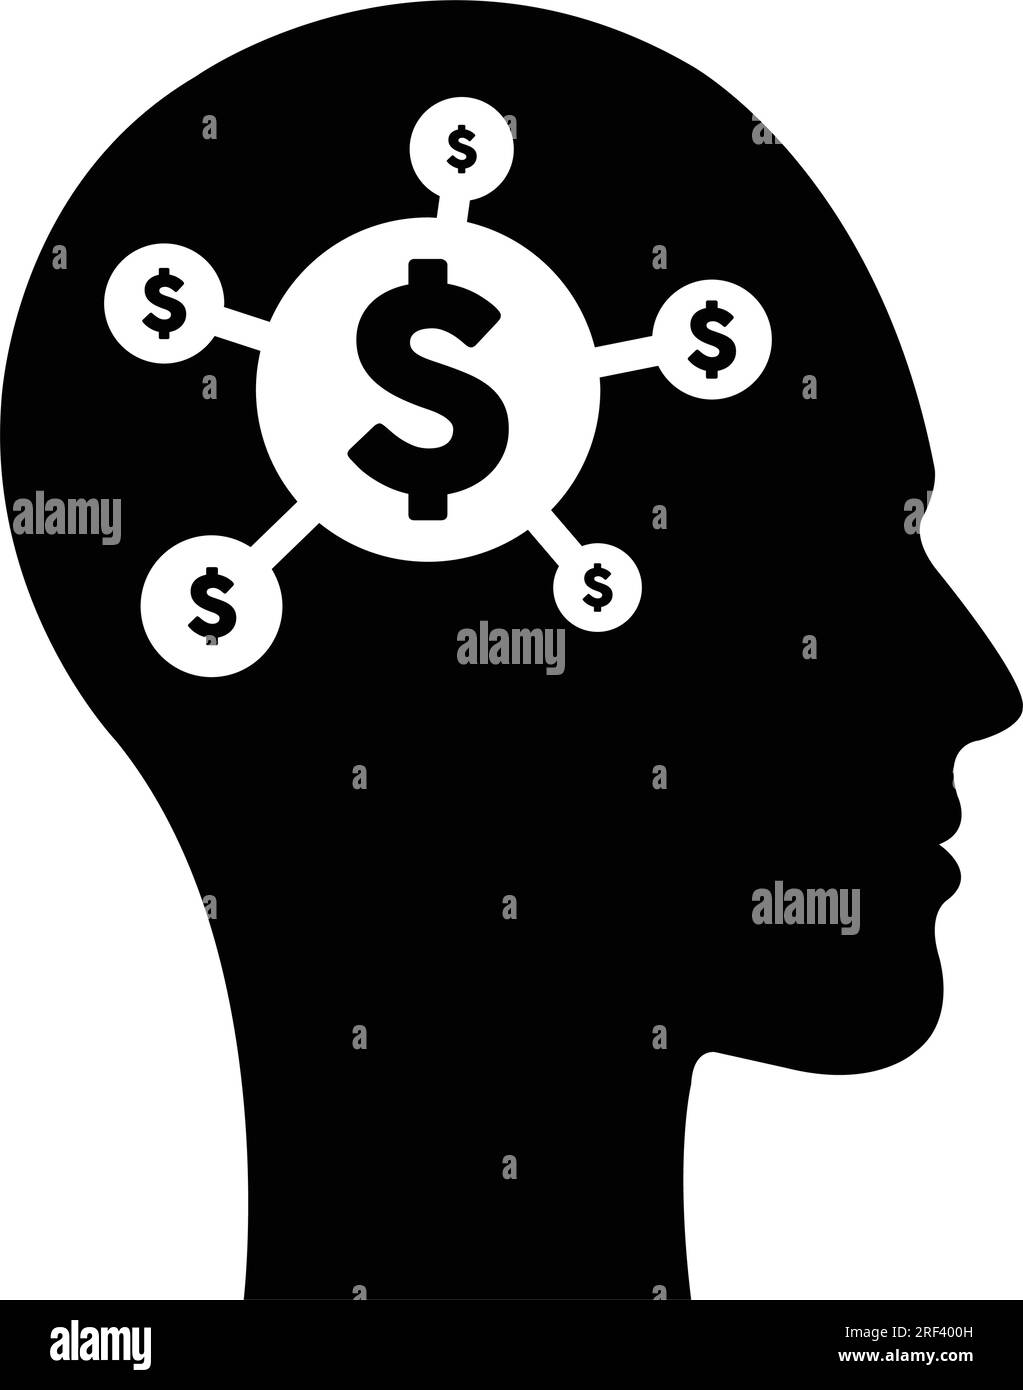 A digital dollar sign icon is displayed on a futuristic human profile face with a brain chip implant for artificial intelligence finance and money min Stock Vector